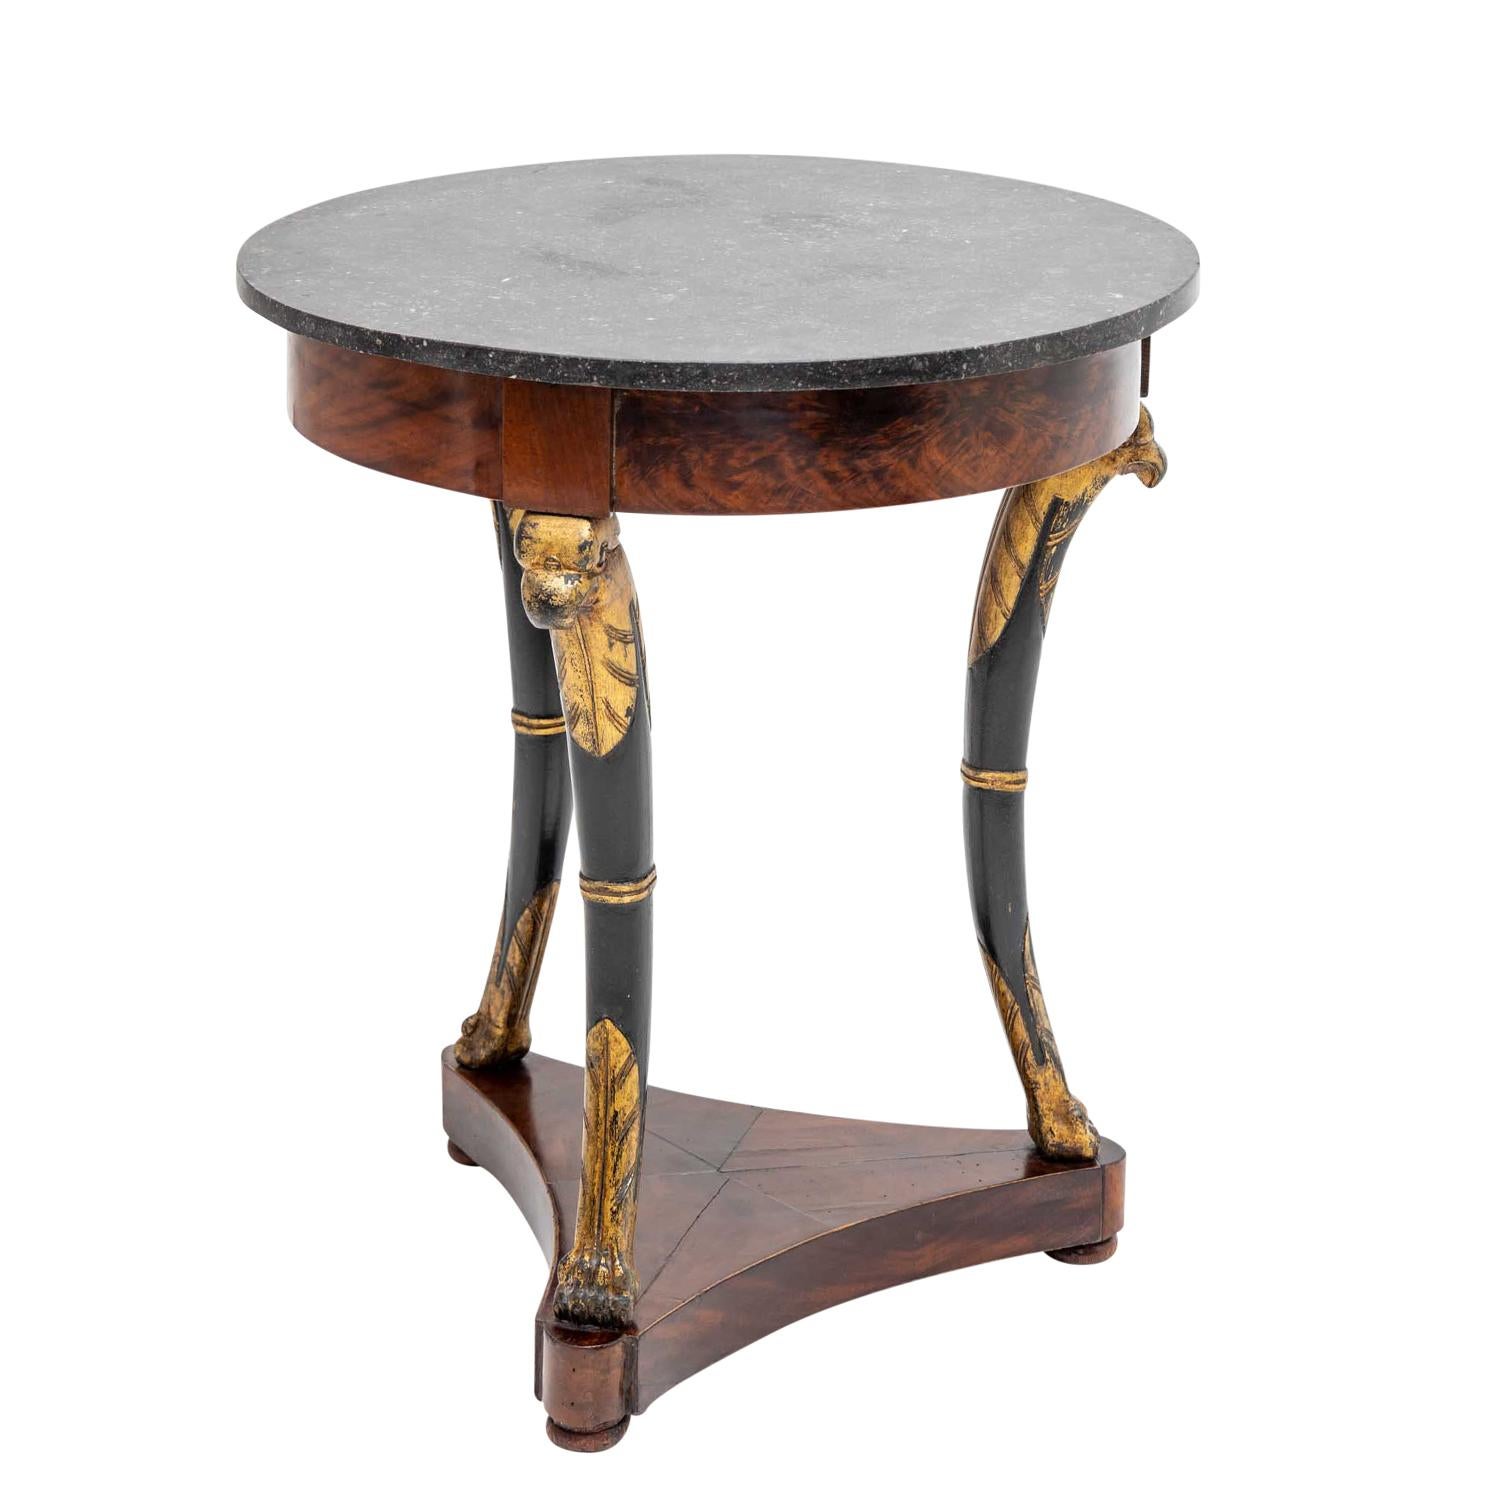 Gilt 19th Century French Empire Round Mahogany Side Table - Antique Marble Table For Sale